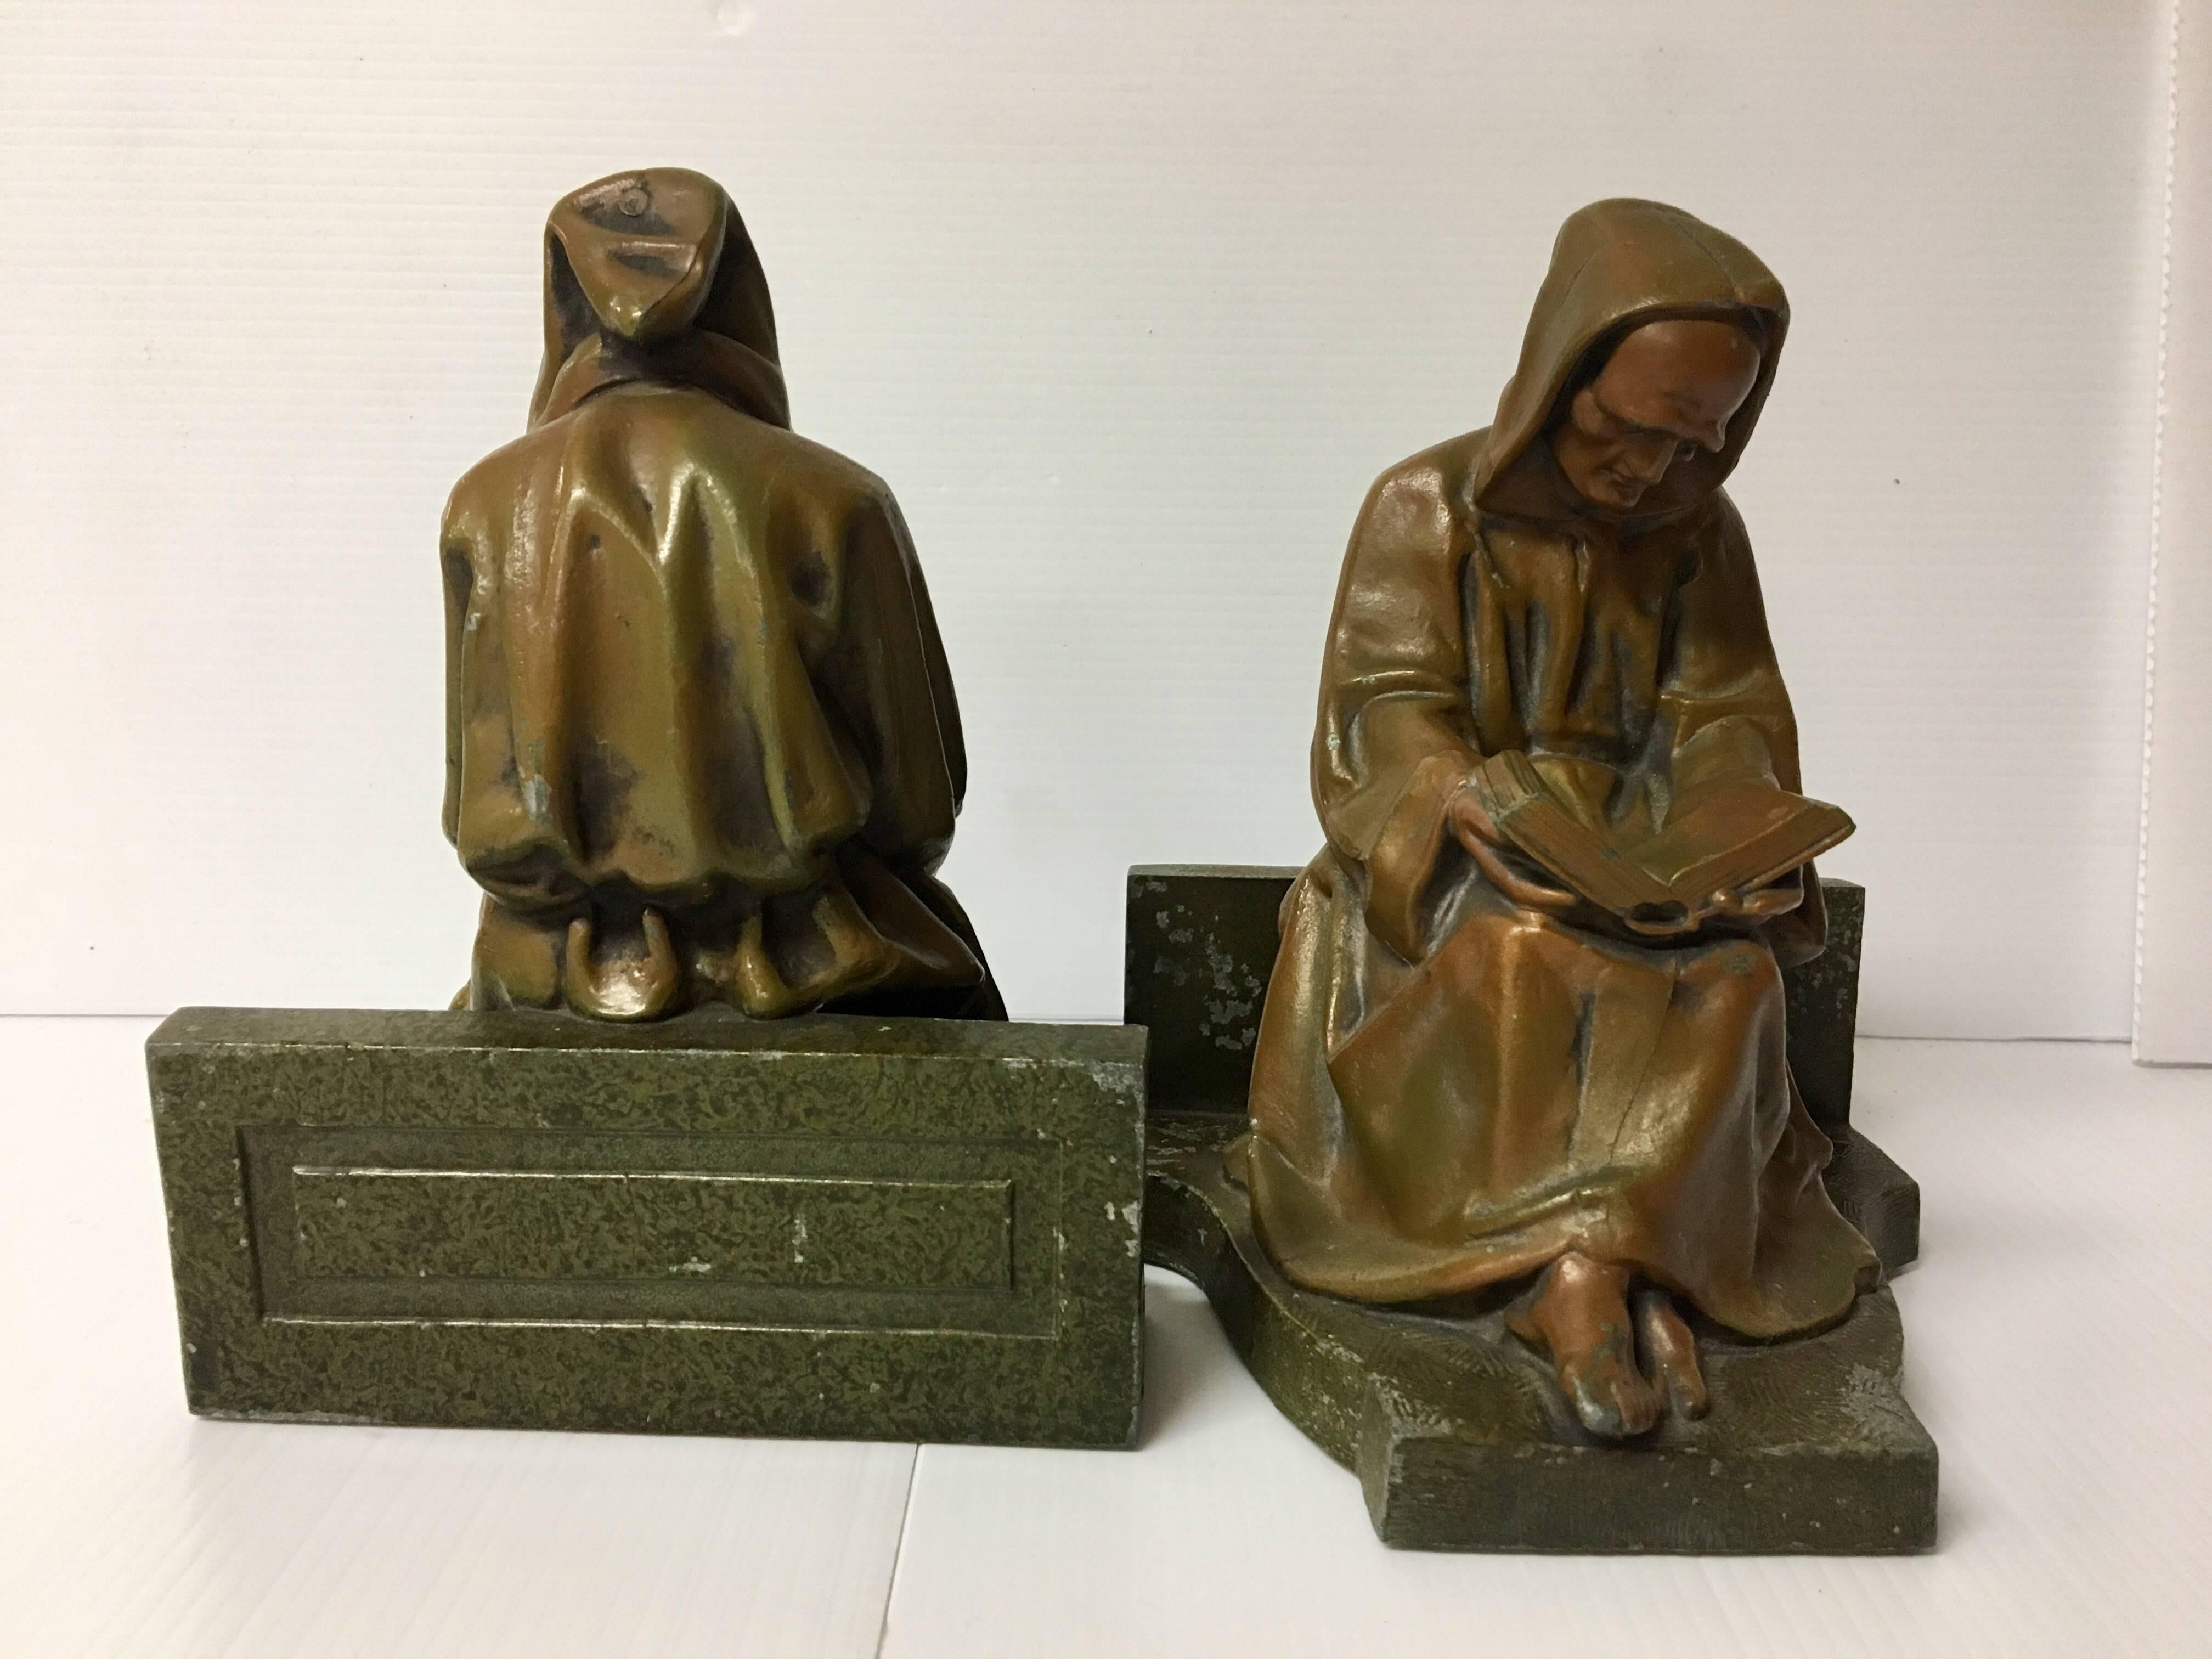 Antique pair of bronze finish monk / scholar reading bookends. Some chips on the finish, nice detail on cast metal.